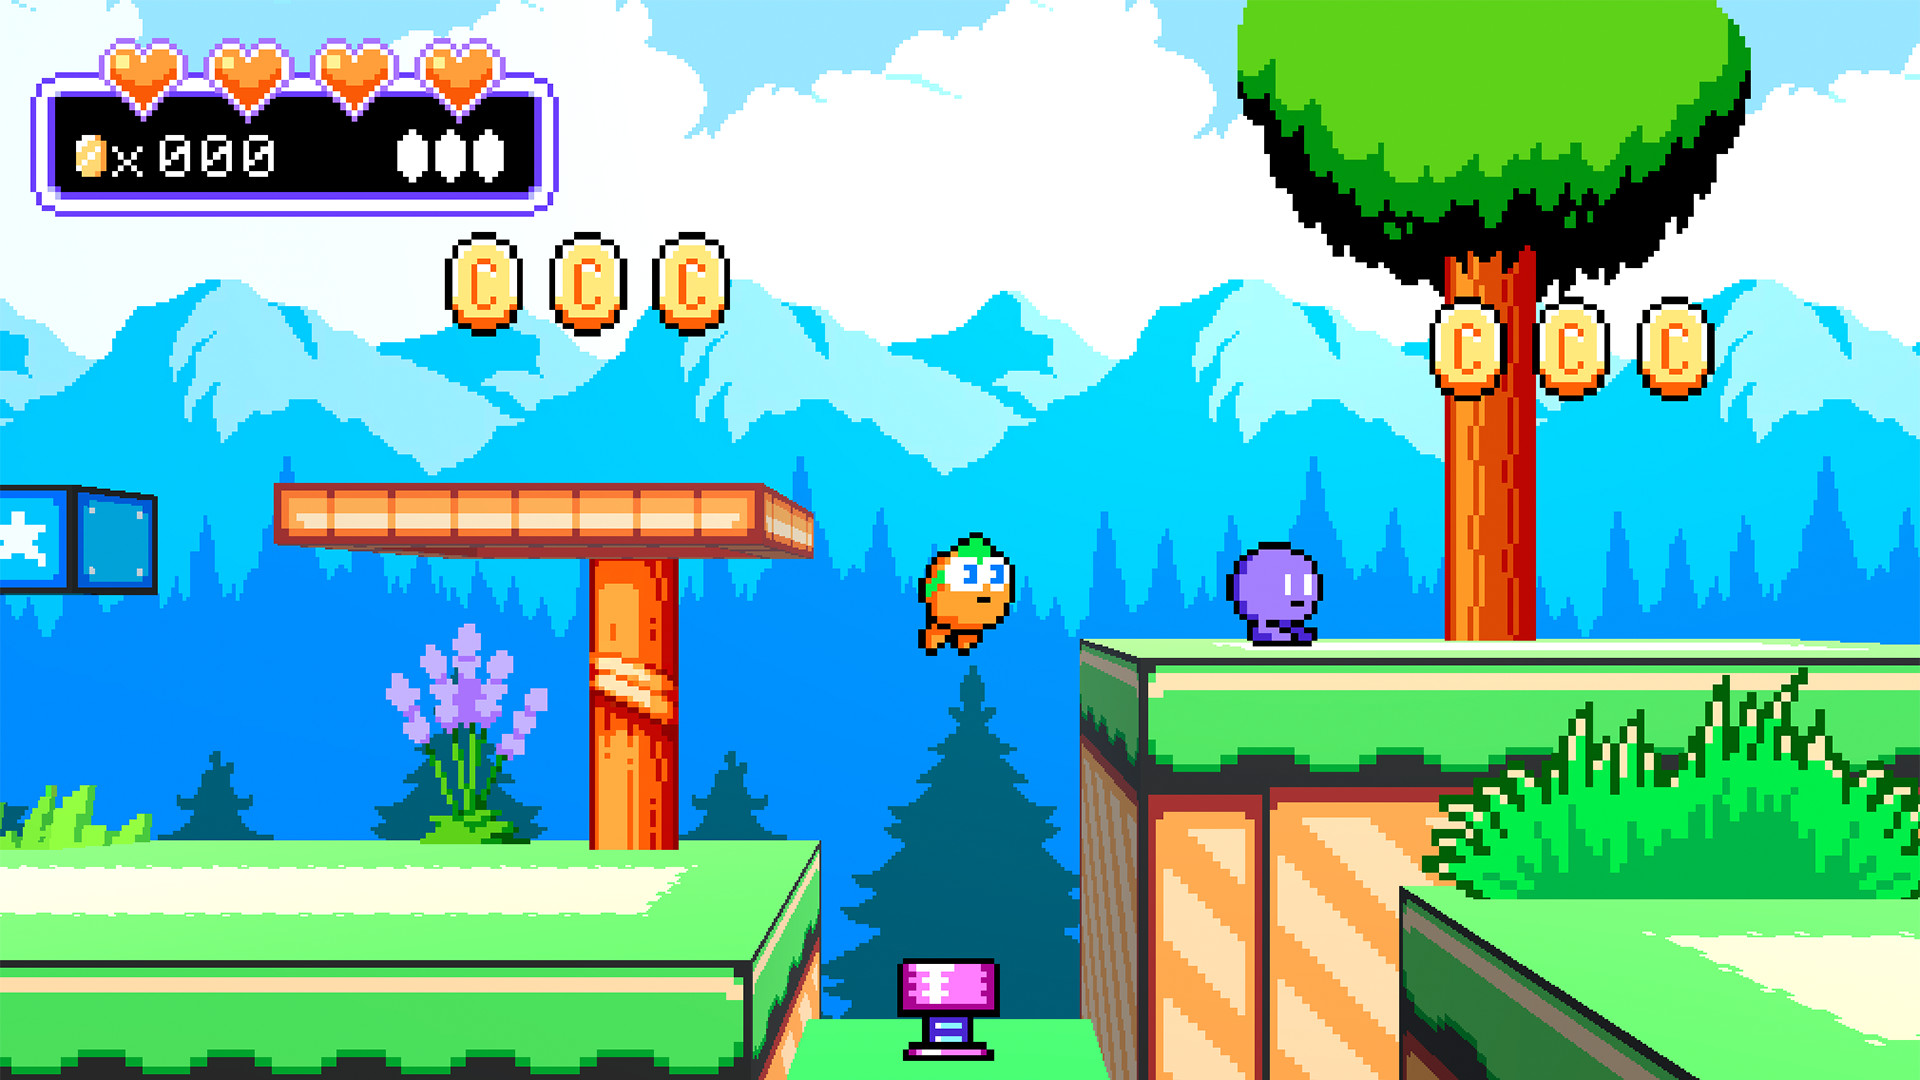 Rog in midair between platform and a cliff with bluish mountains in the background, purple enemy standing on cliff